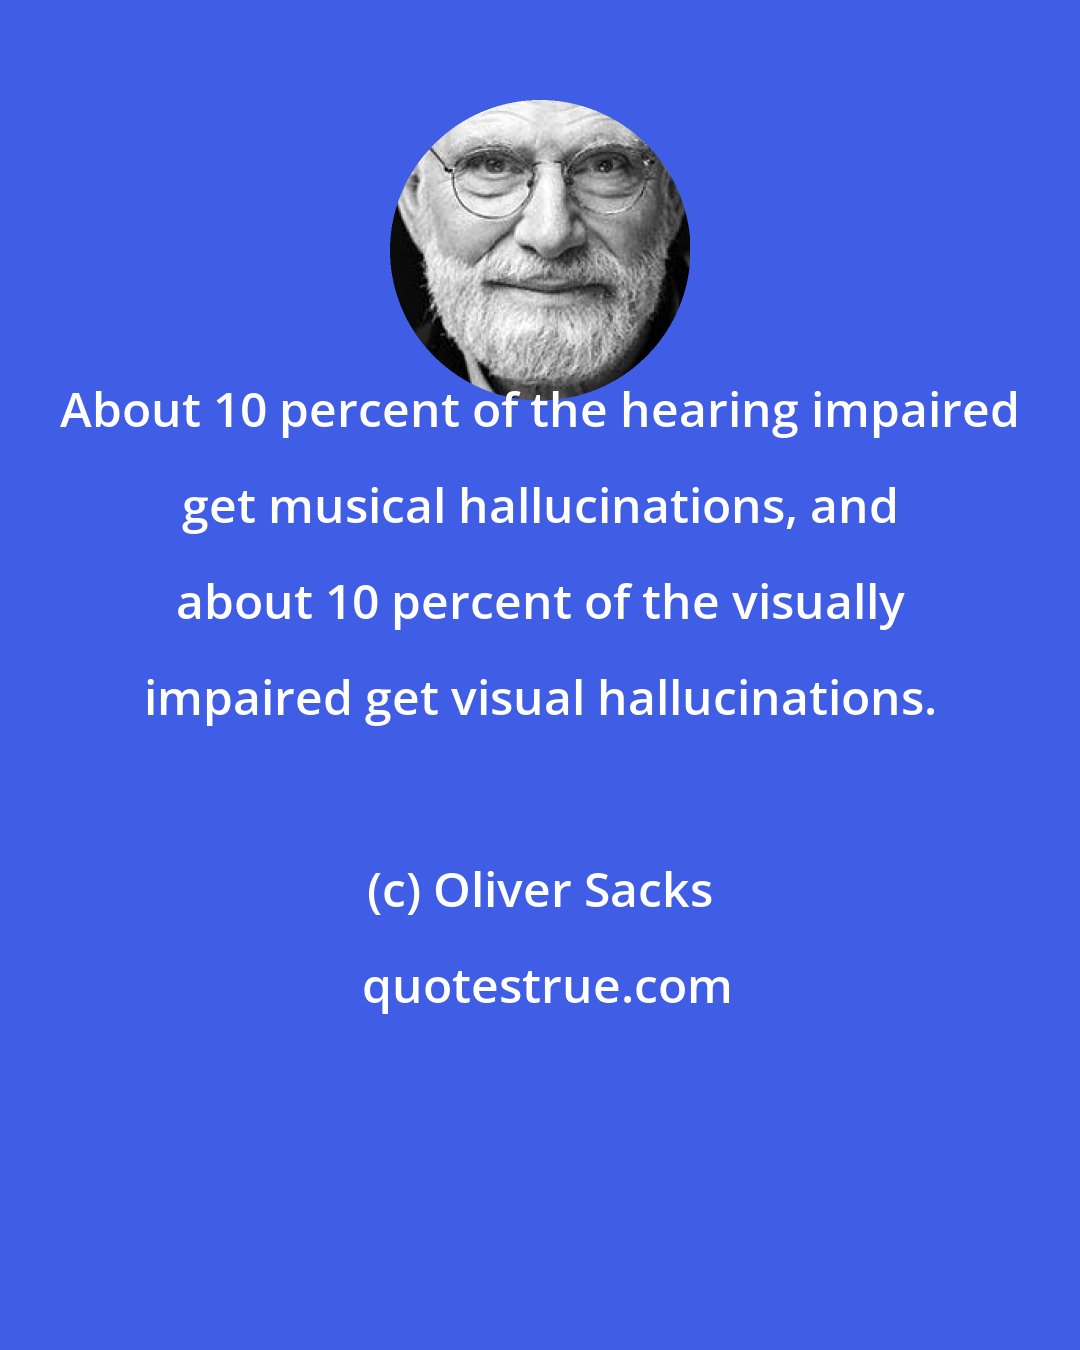 Oliver Sacks: About 10 percent of the hearing impaired get musical hallucinations, and about 10 percent of the visually impaired get visual hallucinations.